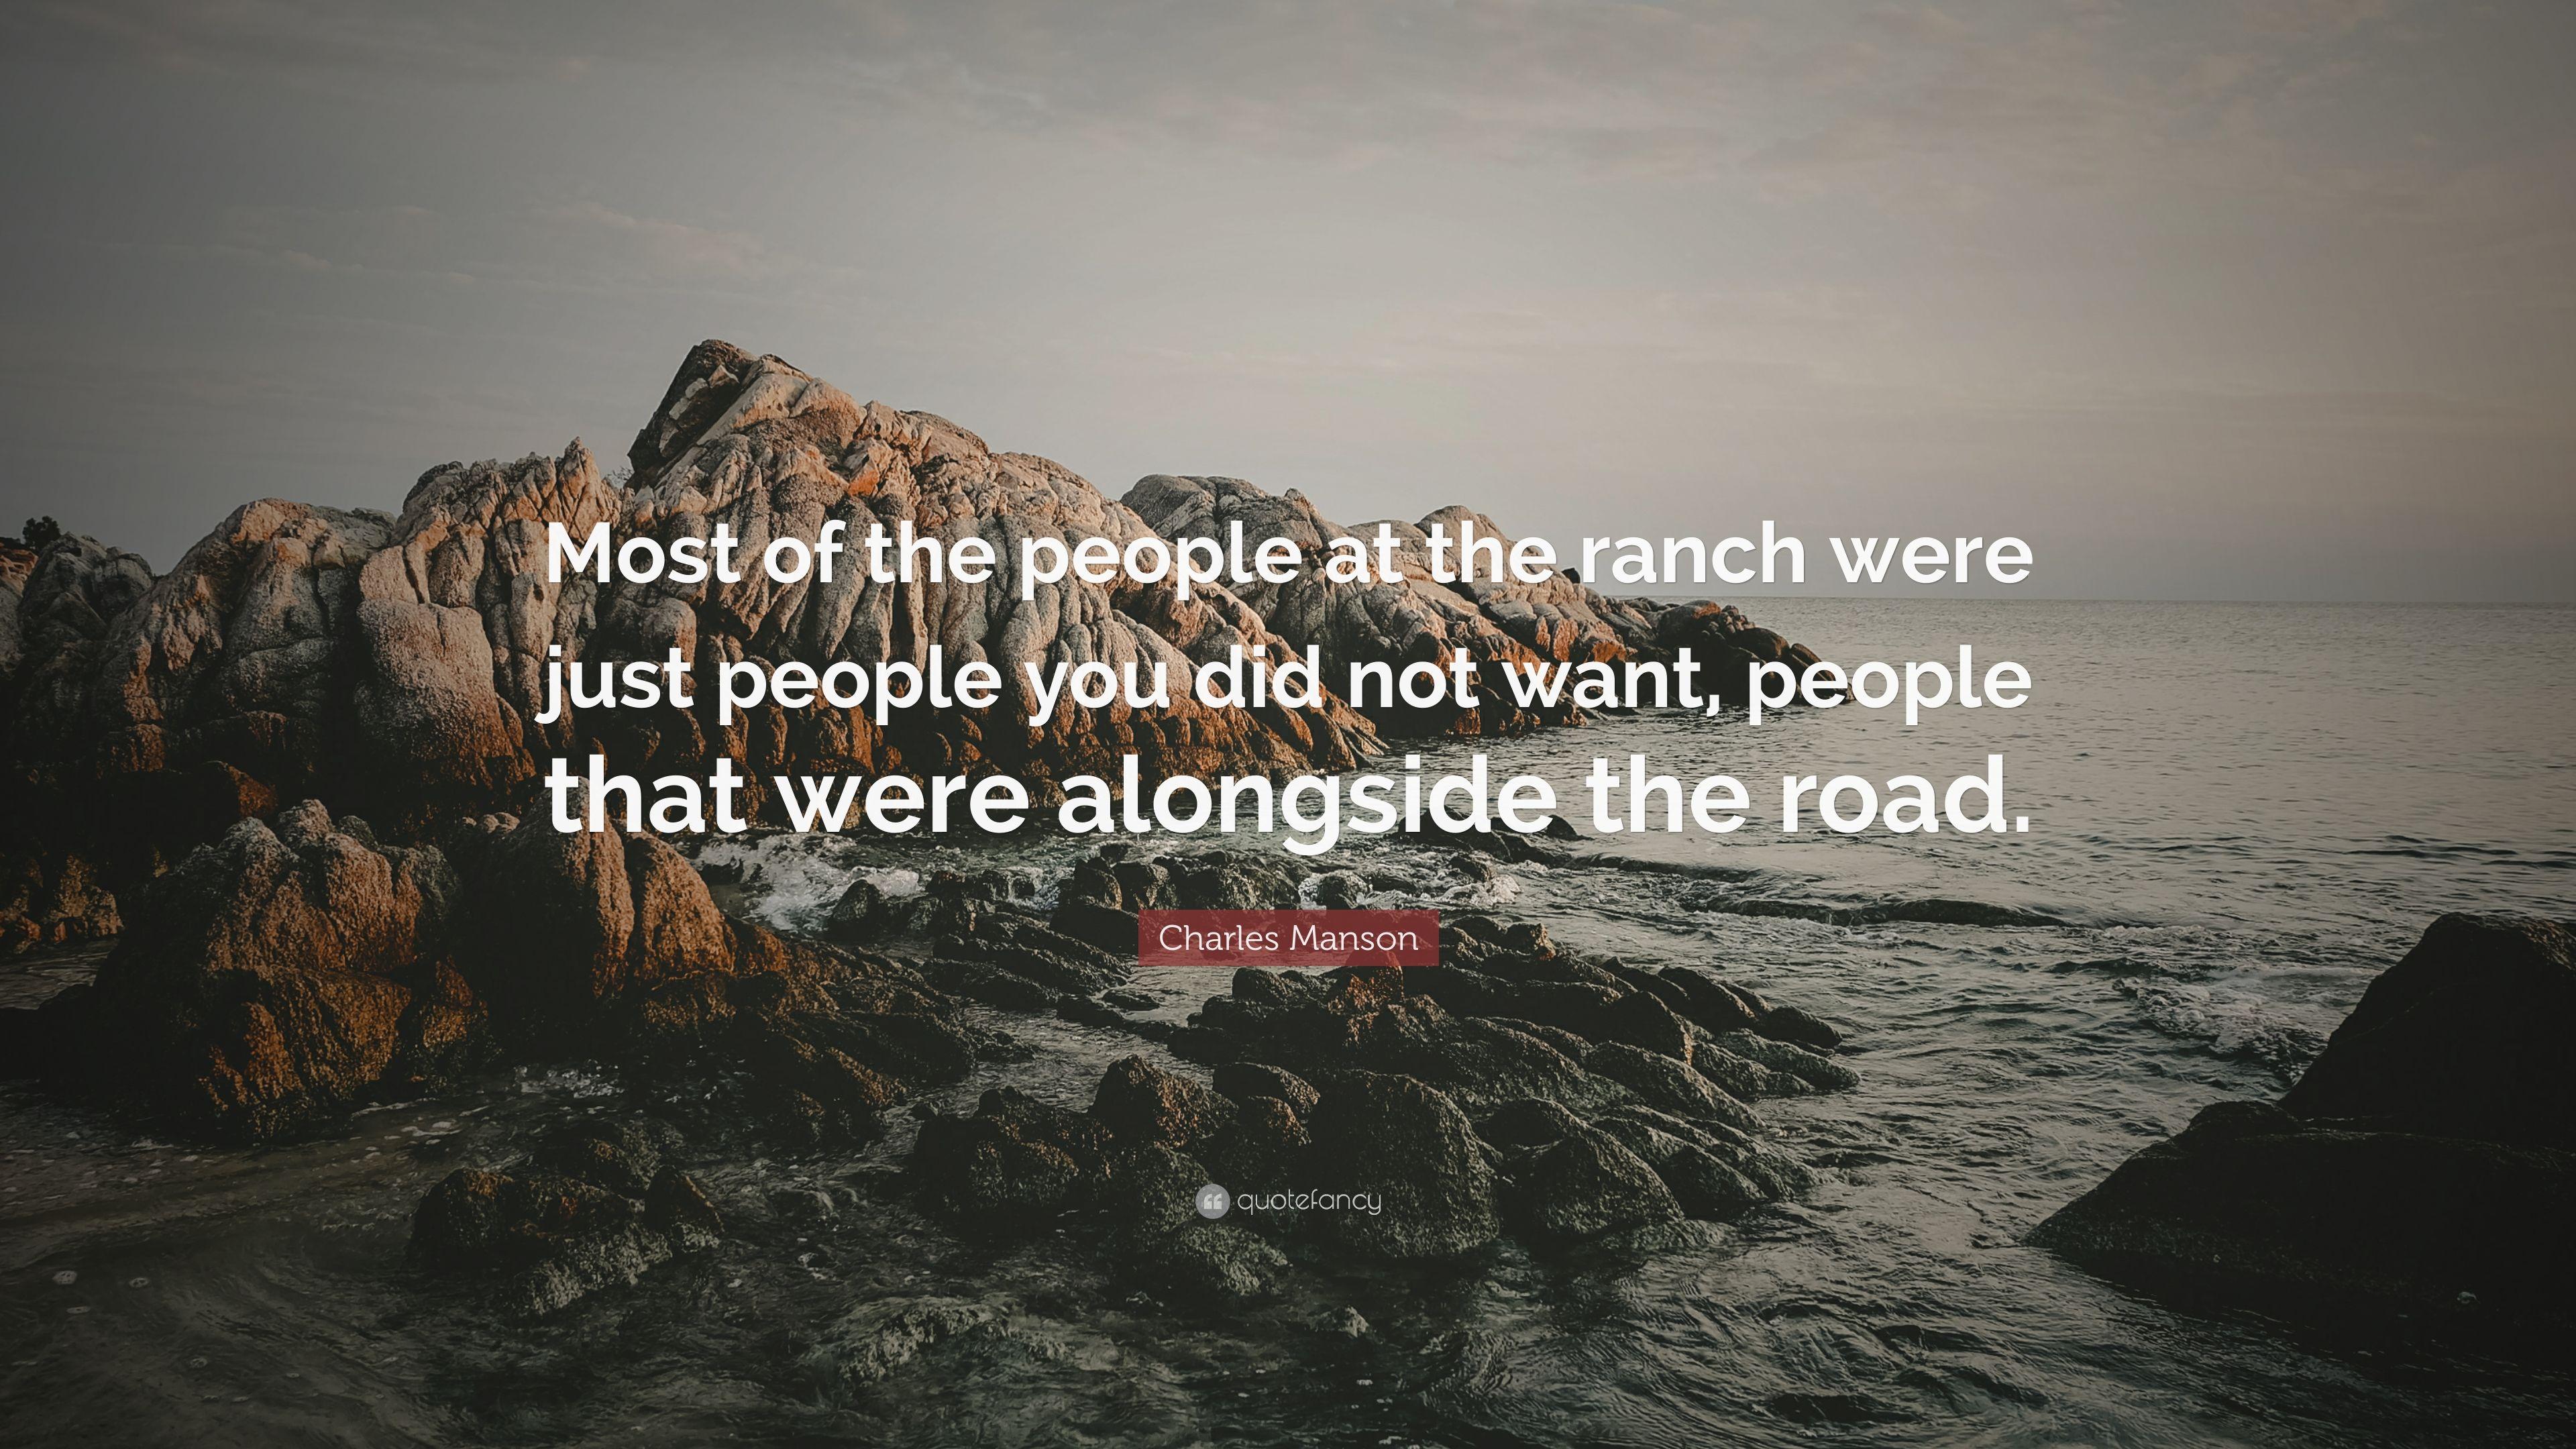 Charles Manson Quote: “Most of the people at the ranch were just